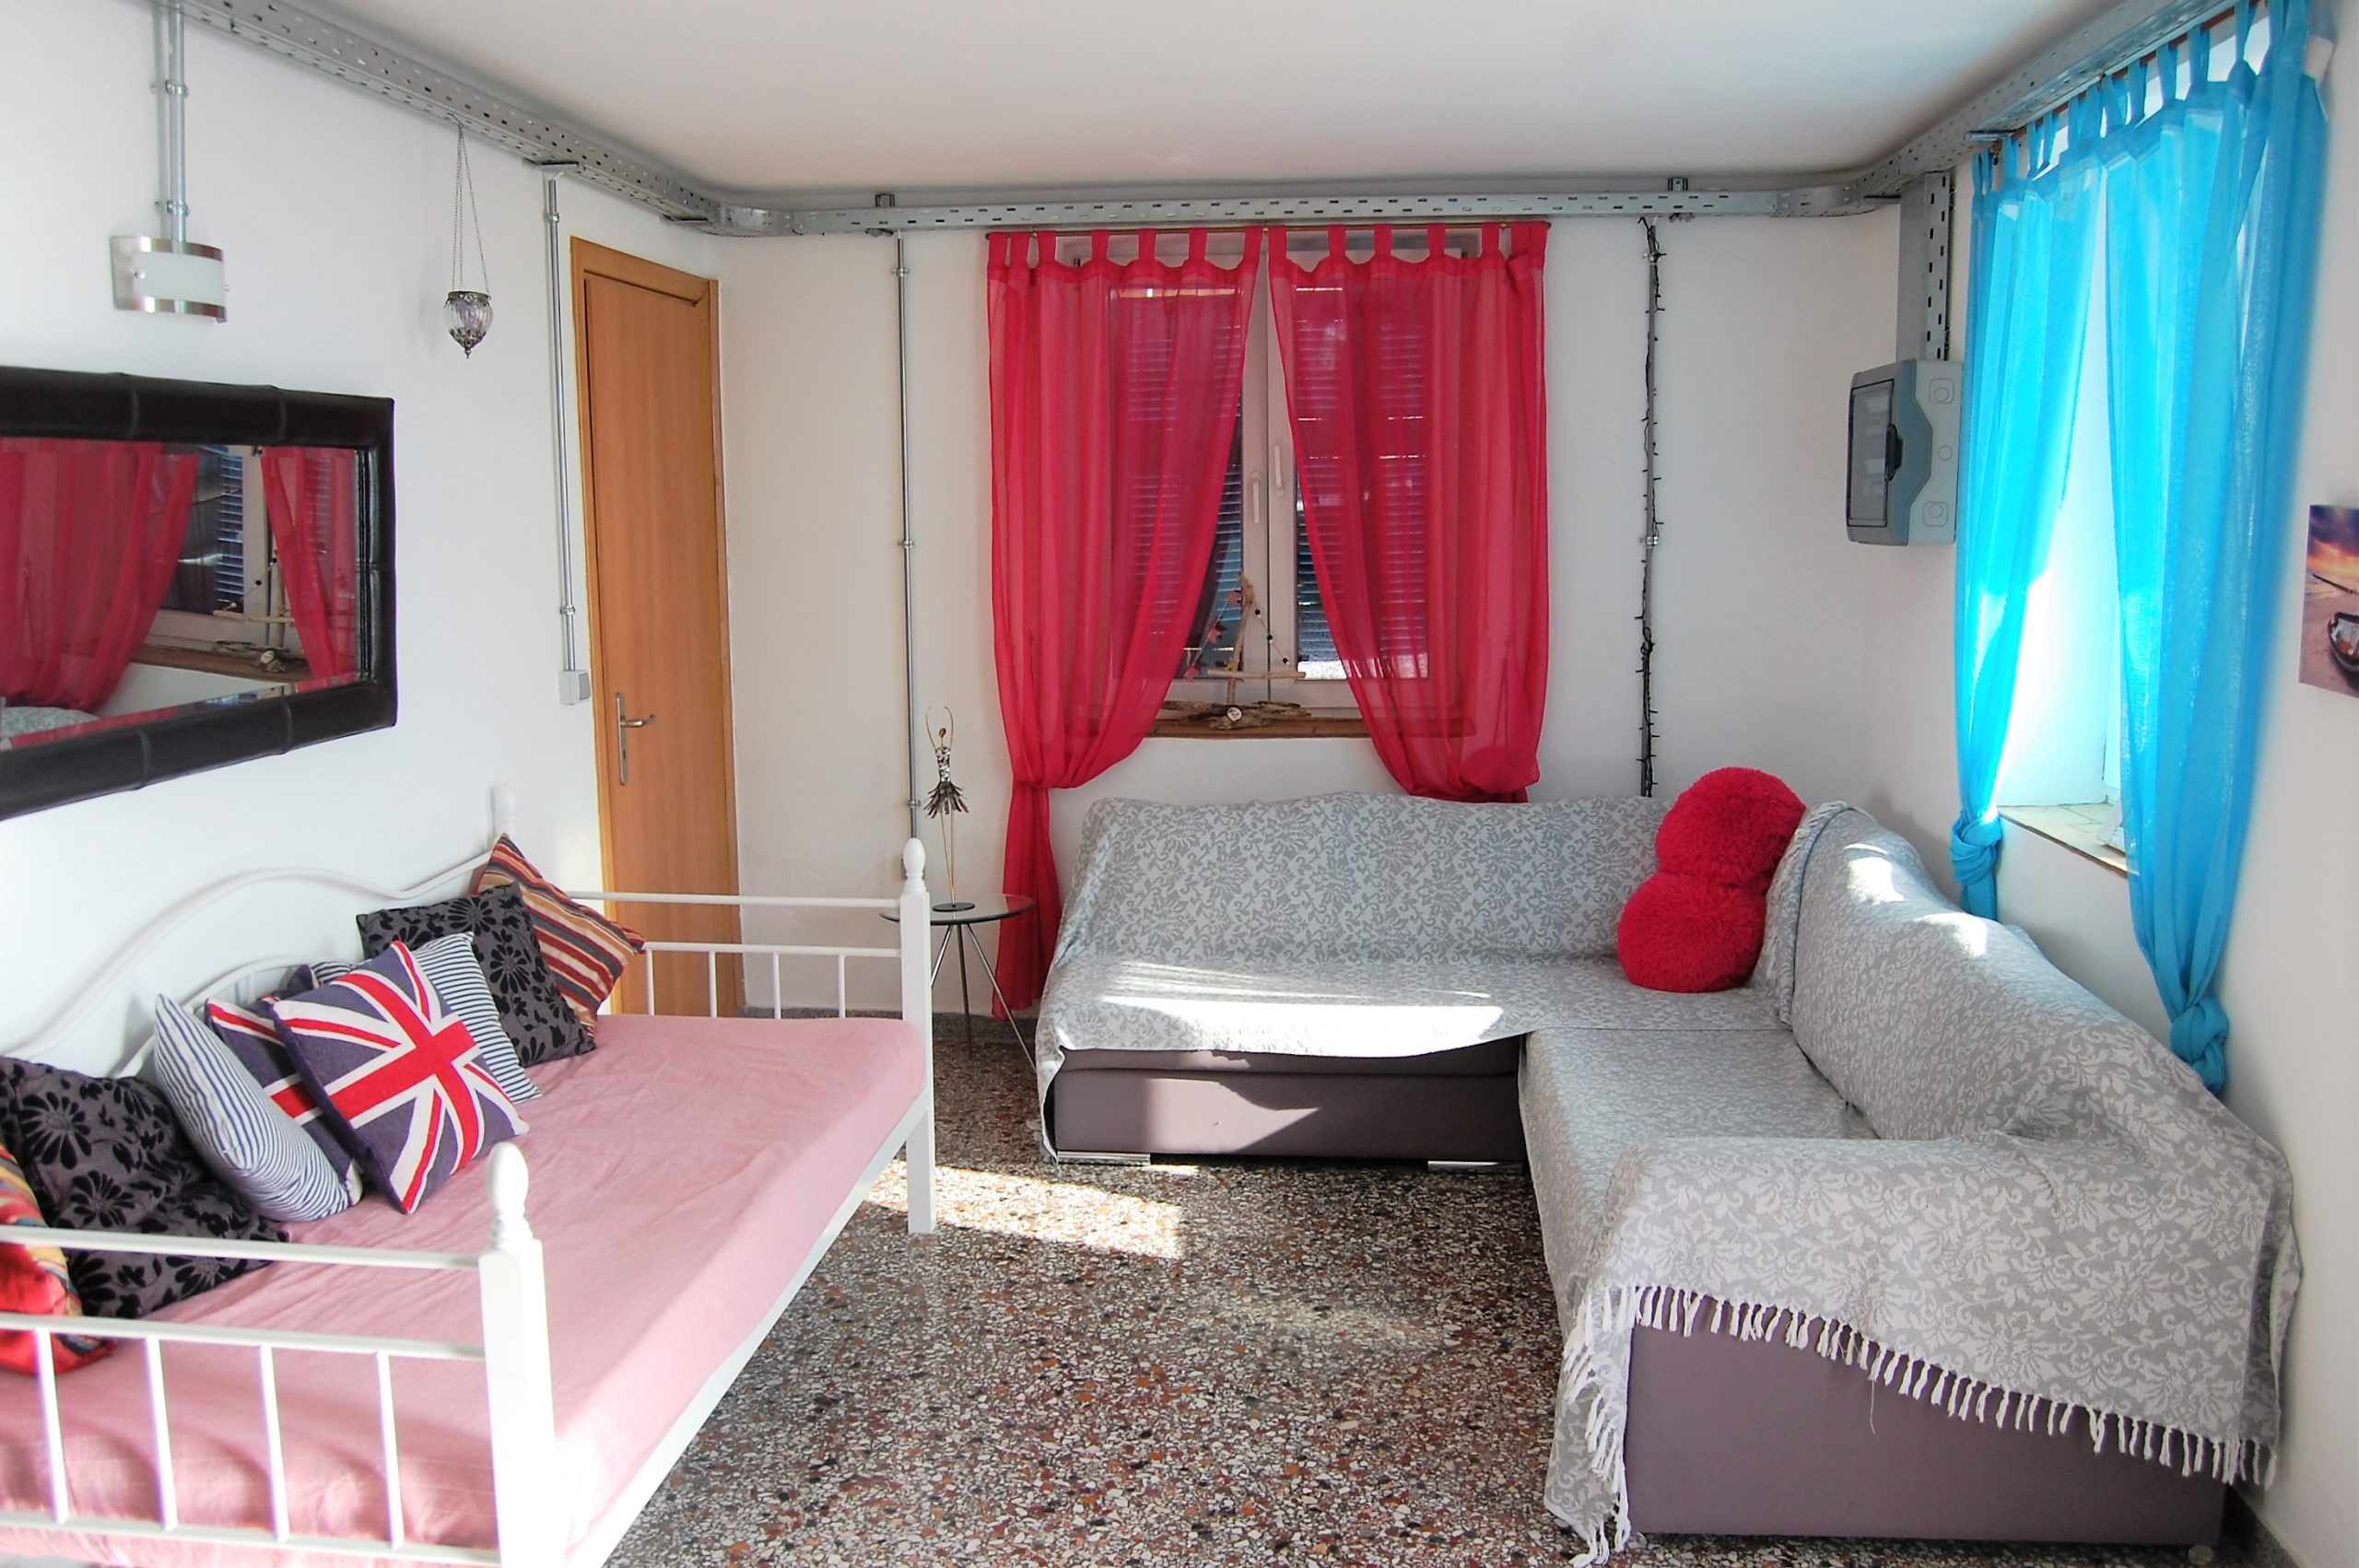 Studio flat of house for sale in Ithaca Greece, Lefki